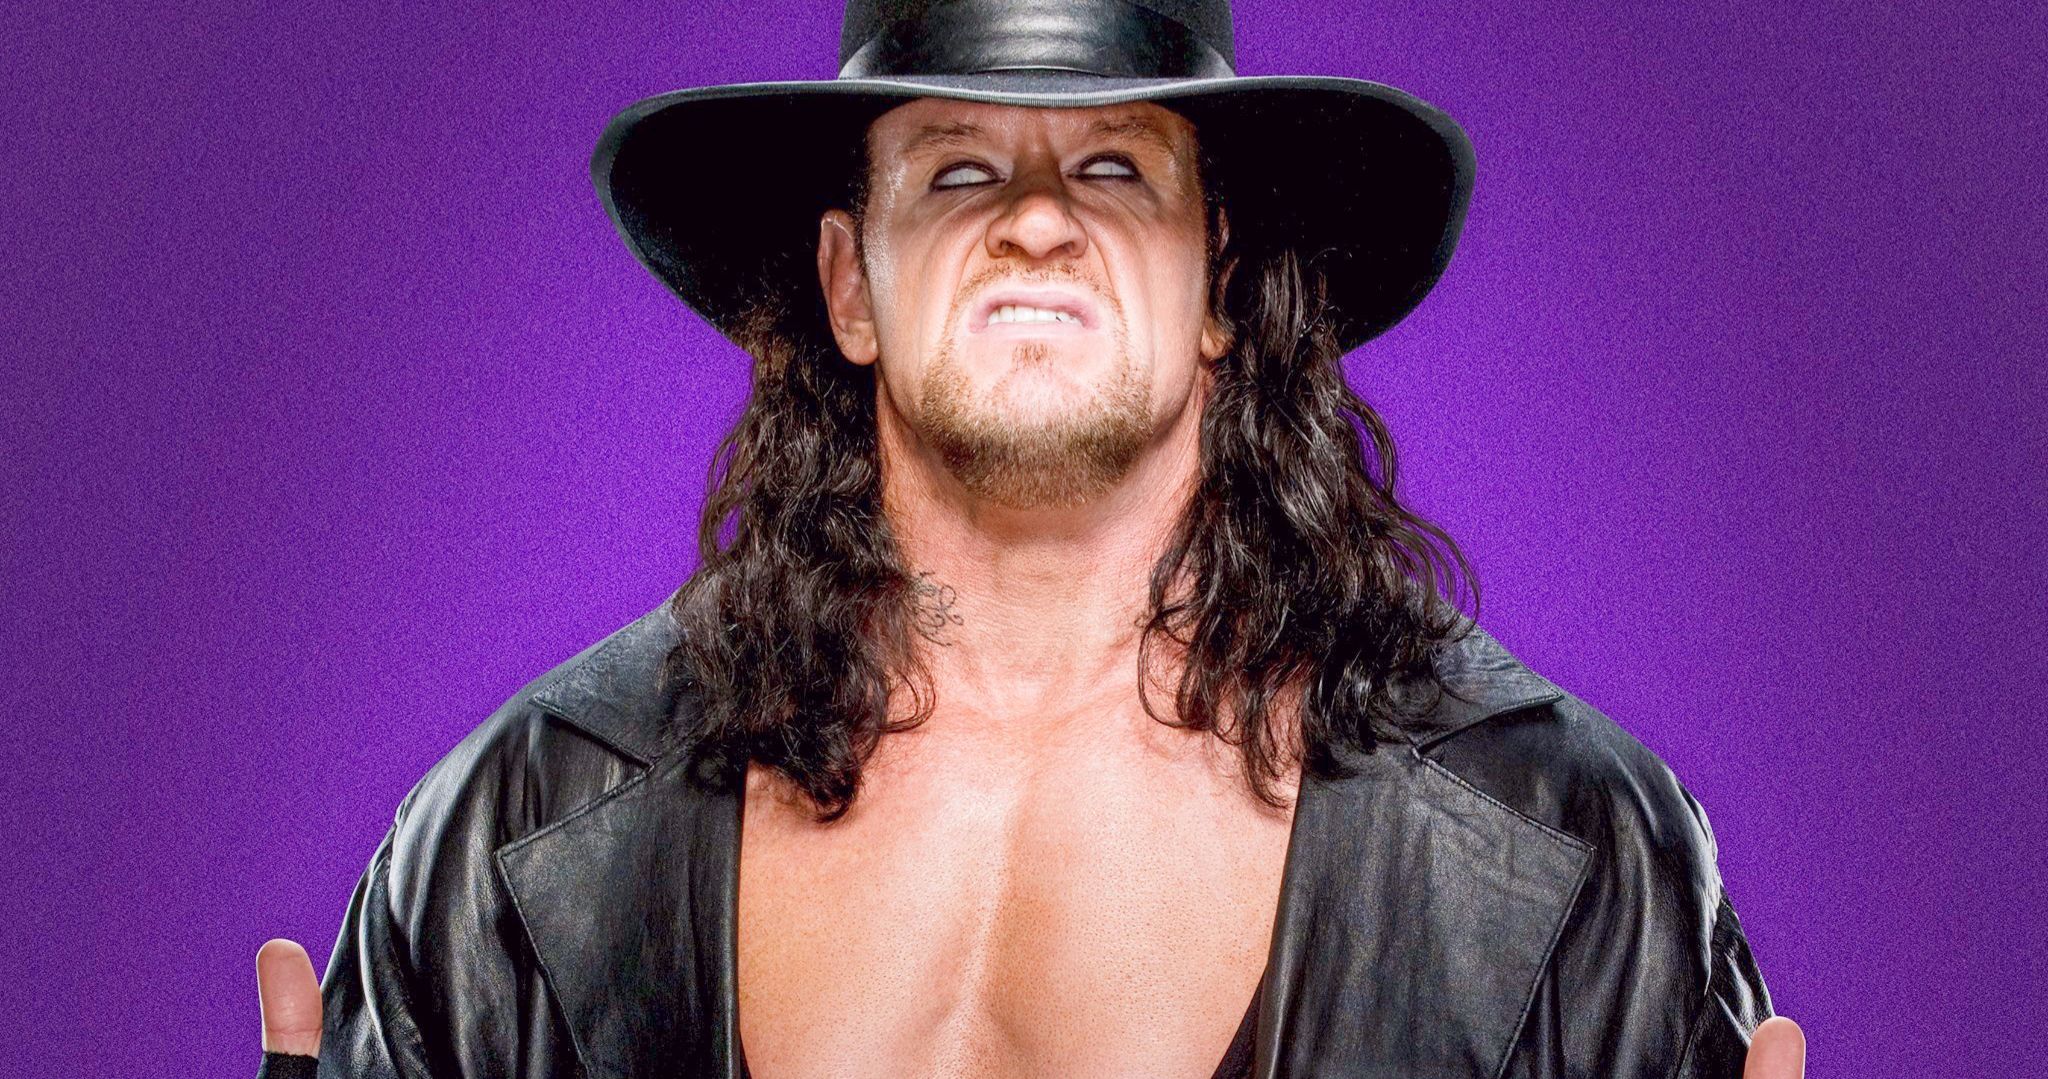 The Undertaker Confirms WWE Retirement: There's No Water Left in The Sponge